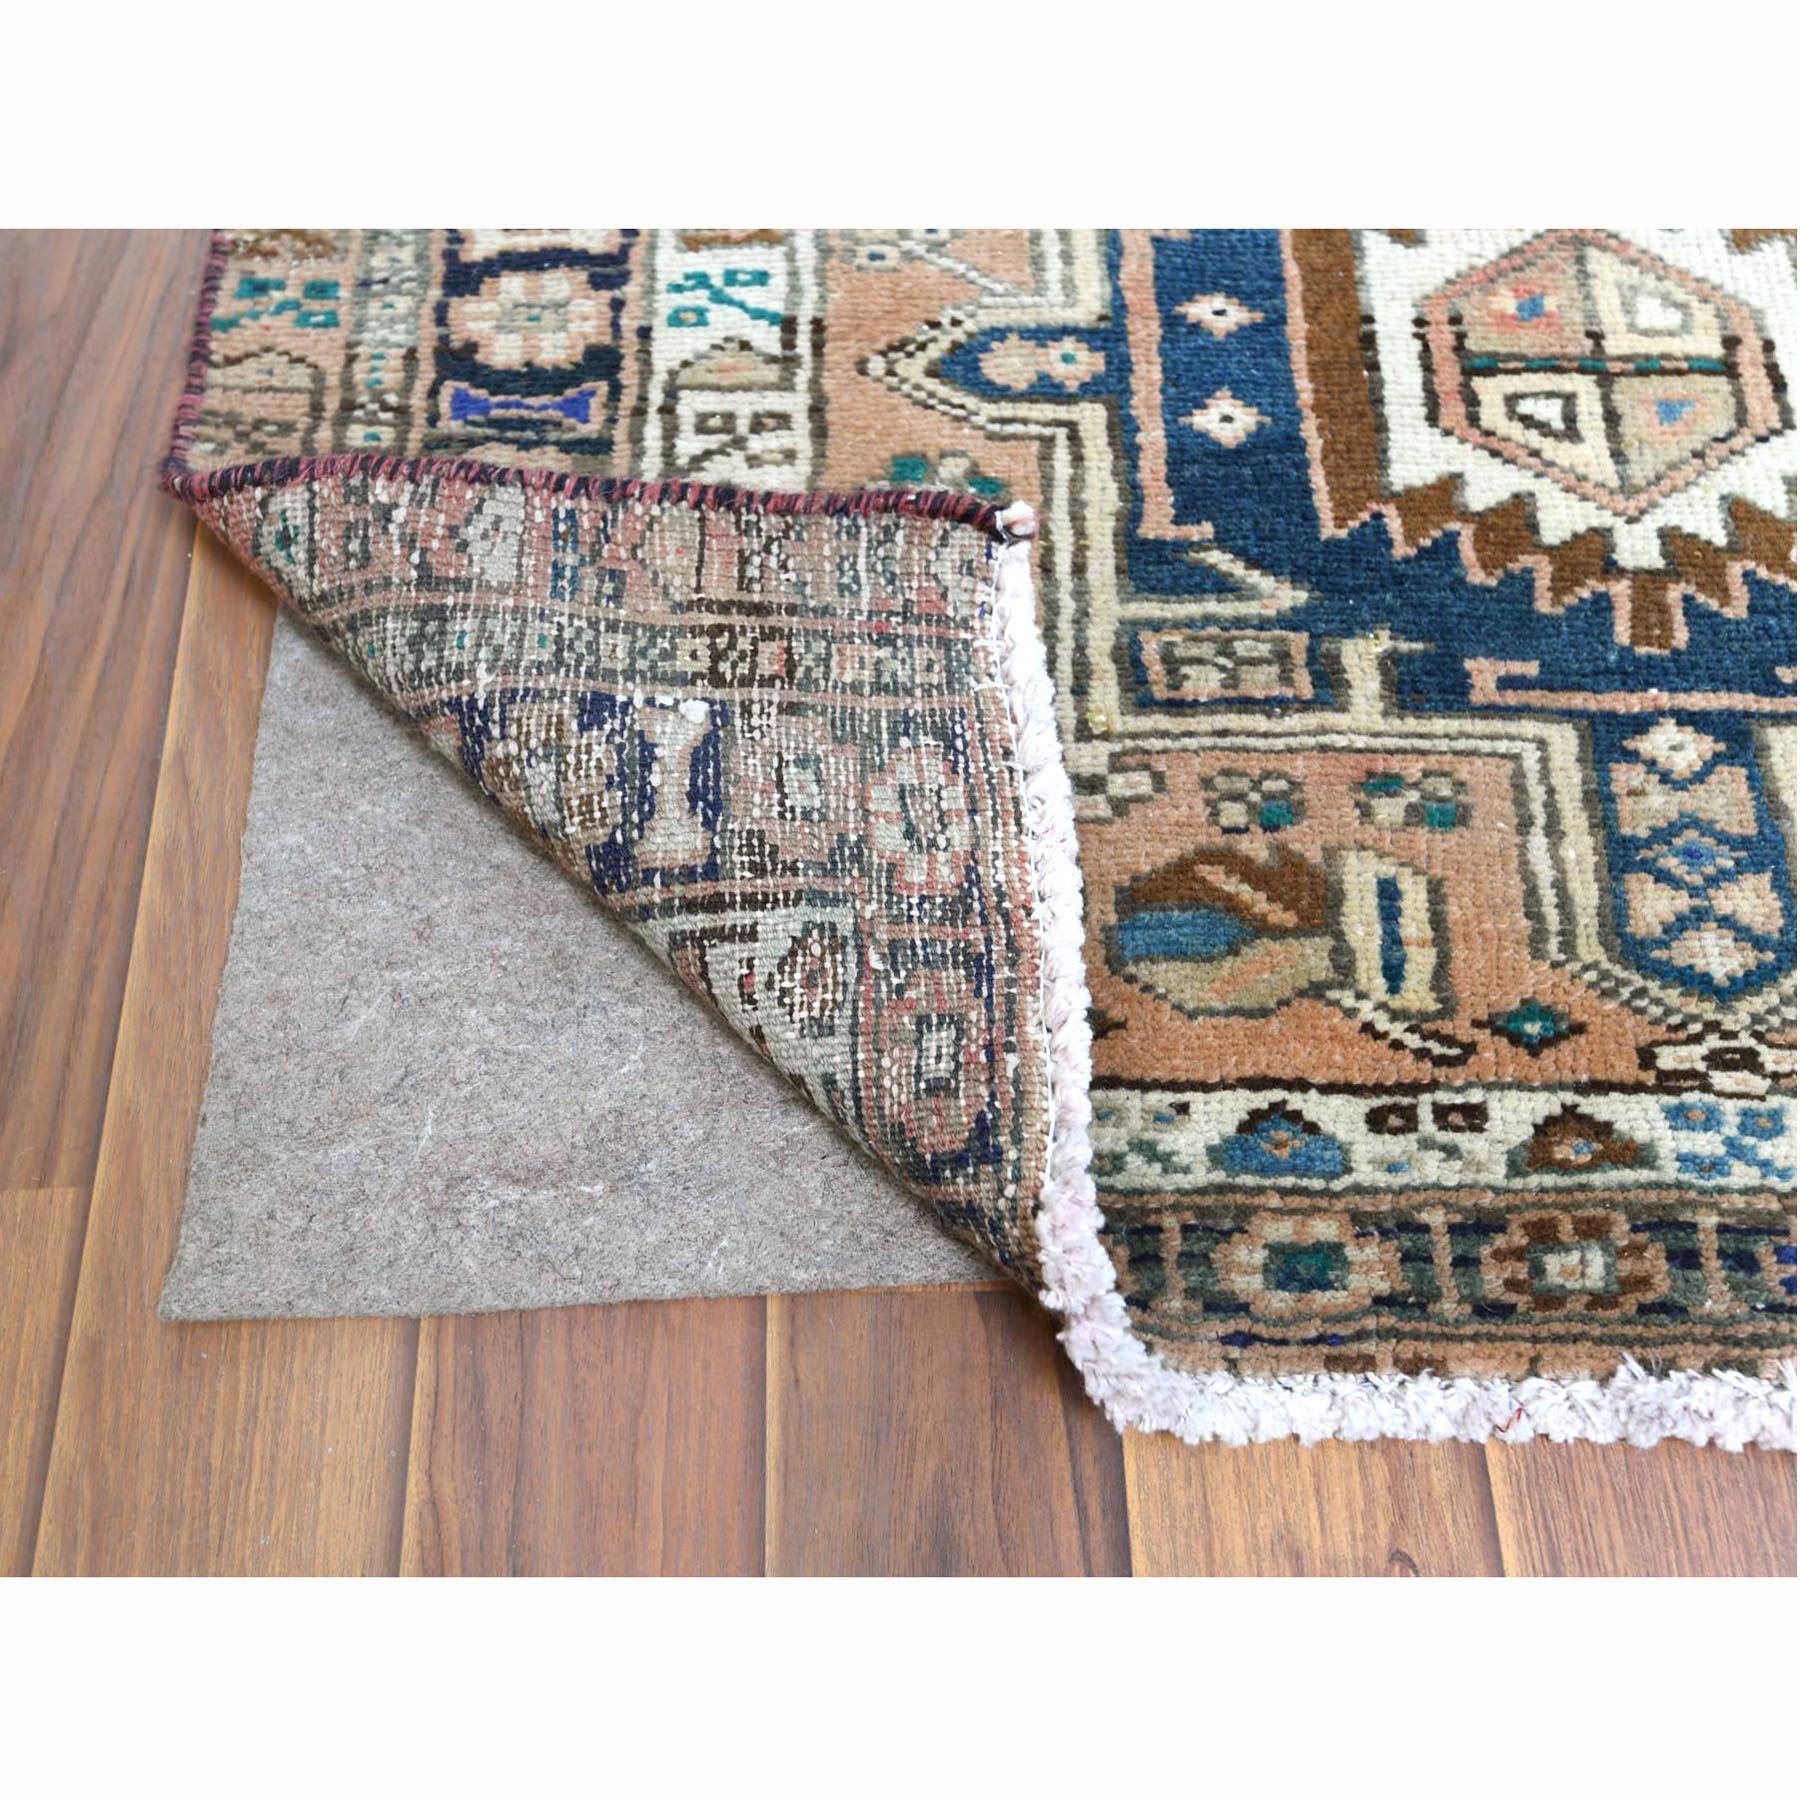 Medieval Old Worn Wool Peach Color Geometric Medallions Persian Karajeh Hand Knotted Rug For Sale